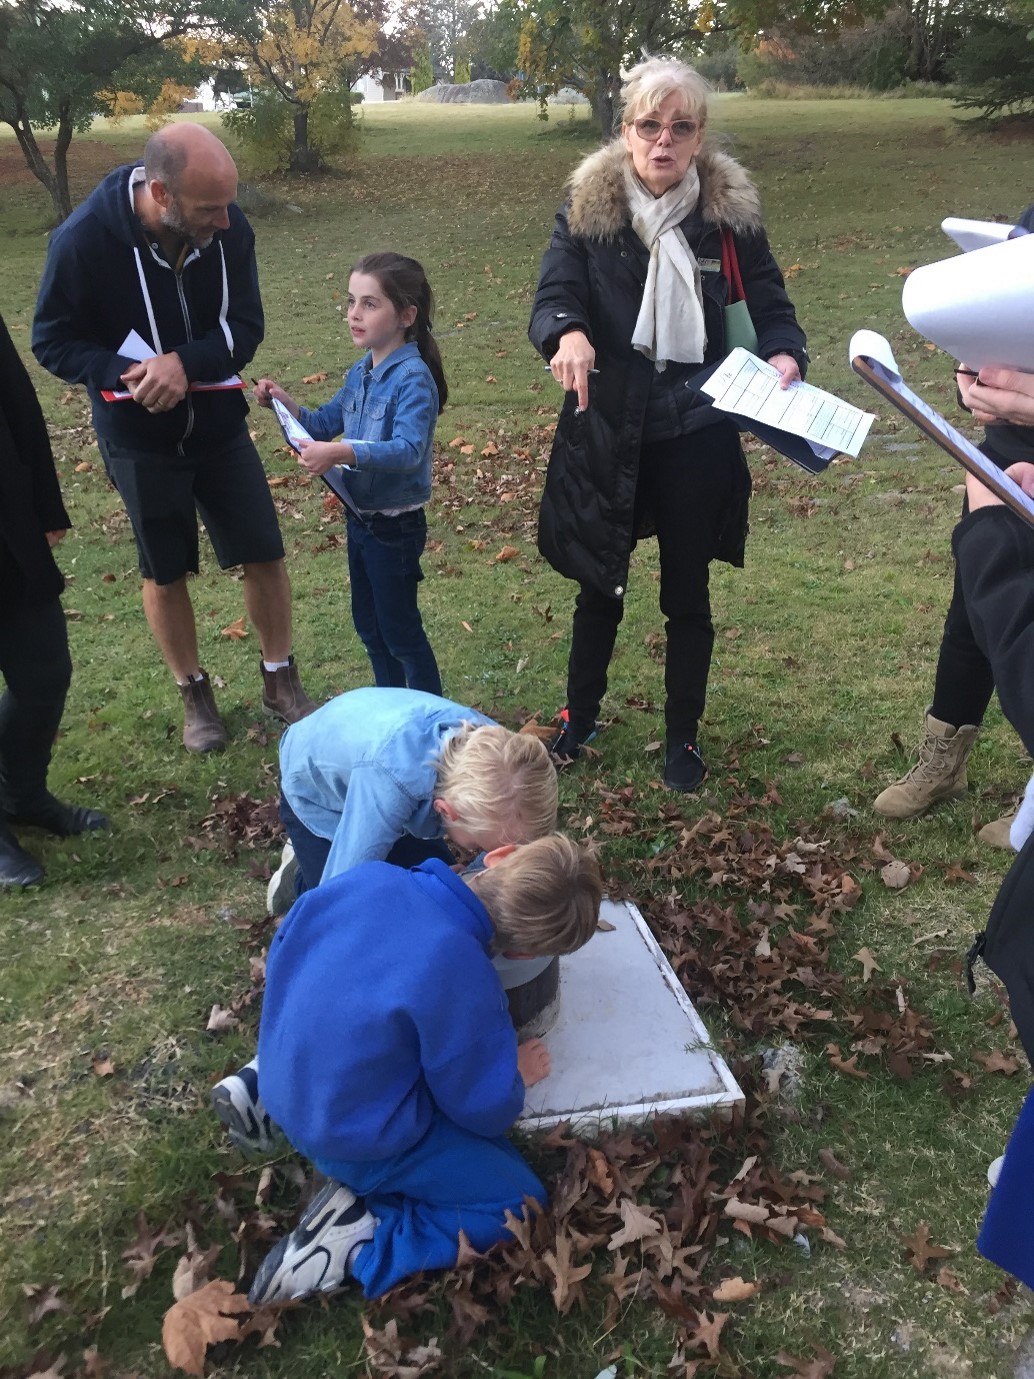 Youth Week Water Treasure Hunt in Uralla with Sandra Eady (ZNET Uralla) and local families, inspecting the newly installed bores for watering parklands in the next drought